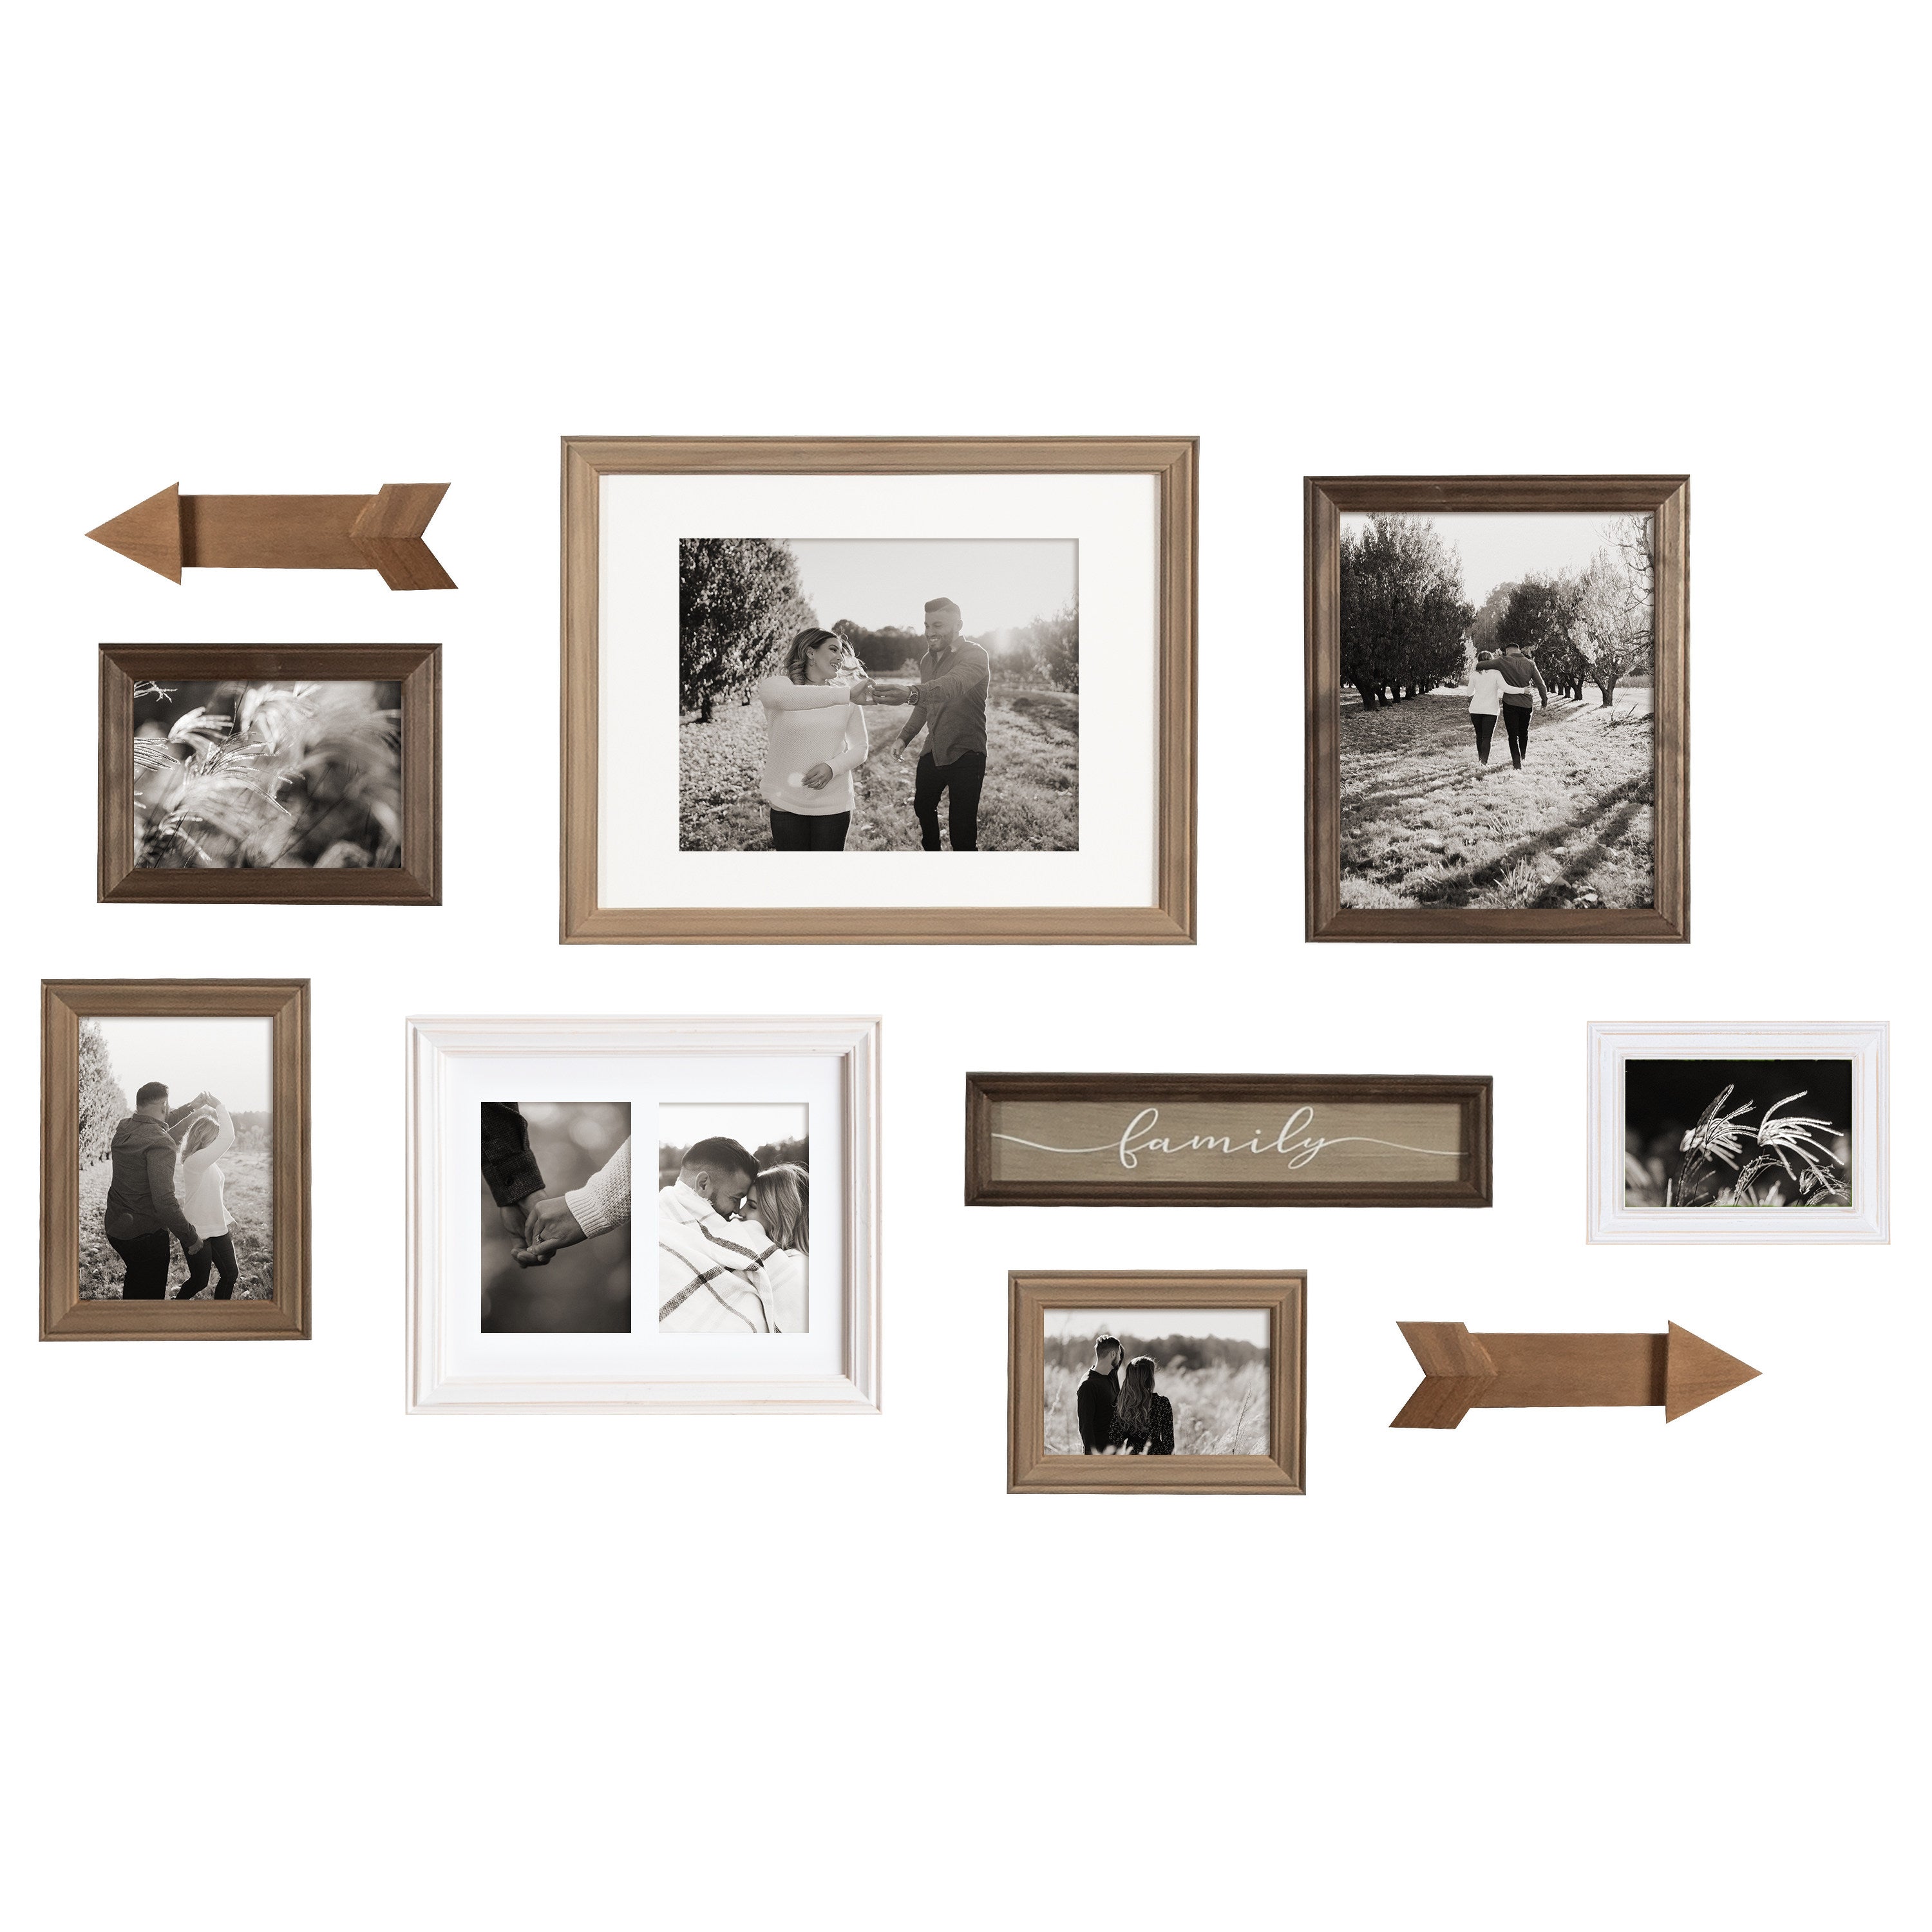 Bordeaux Expressions Gallery Wall Frame Kit